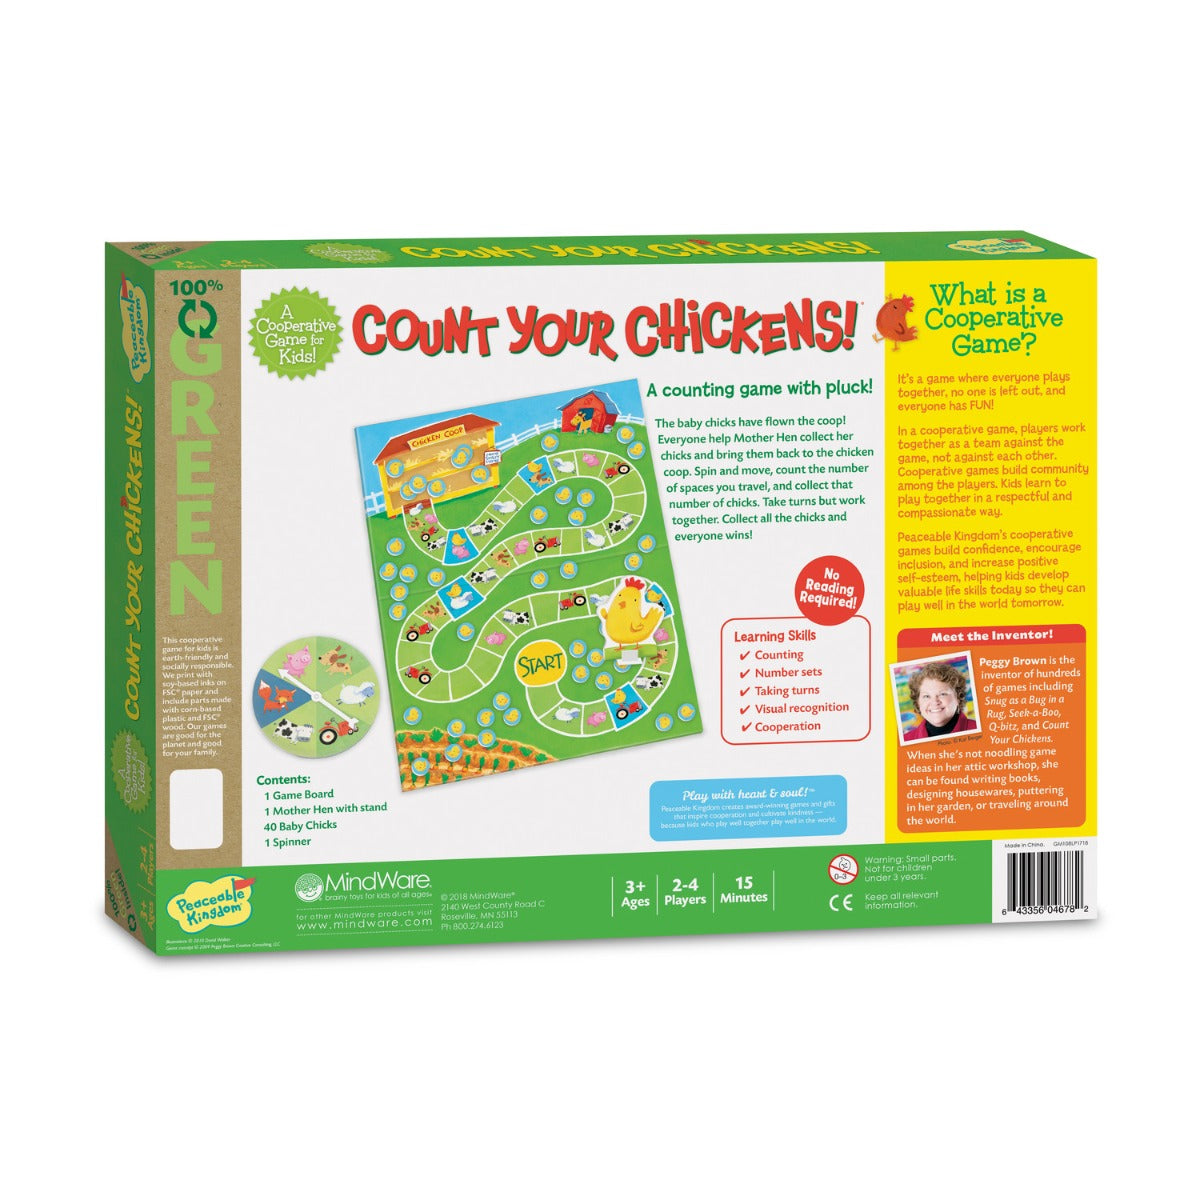 Count Your Chickens Board Game - Cooperative Game